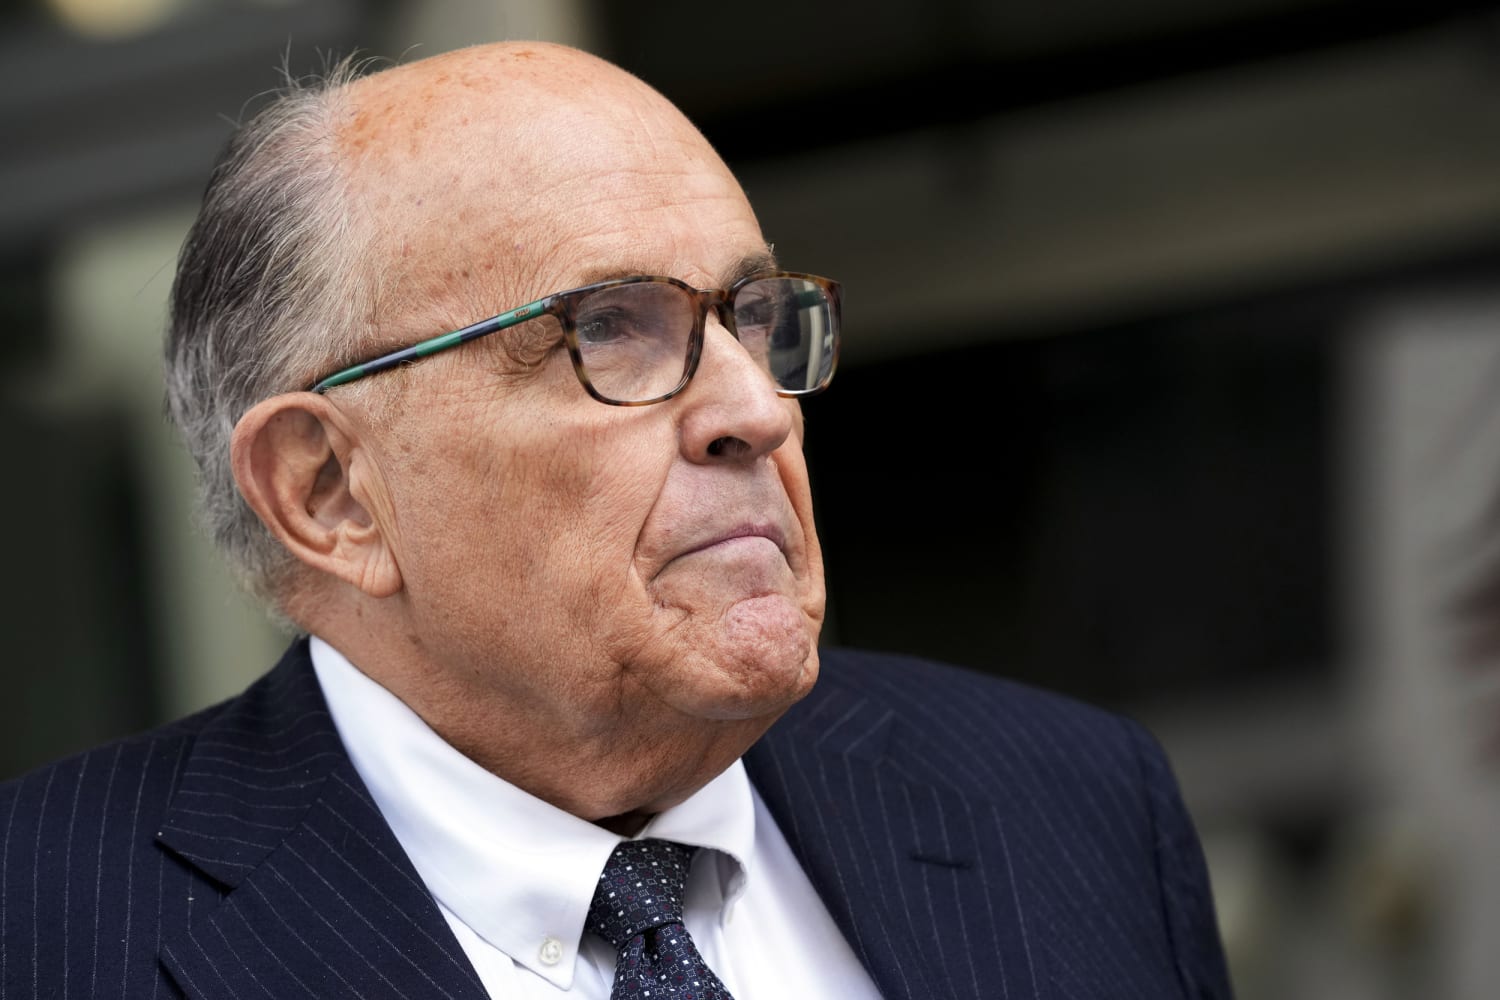 A jury decides how a lot Rudy Giuliani ought to pay to the election officers he defamed